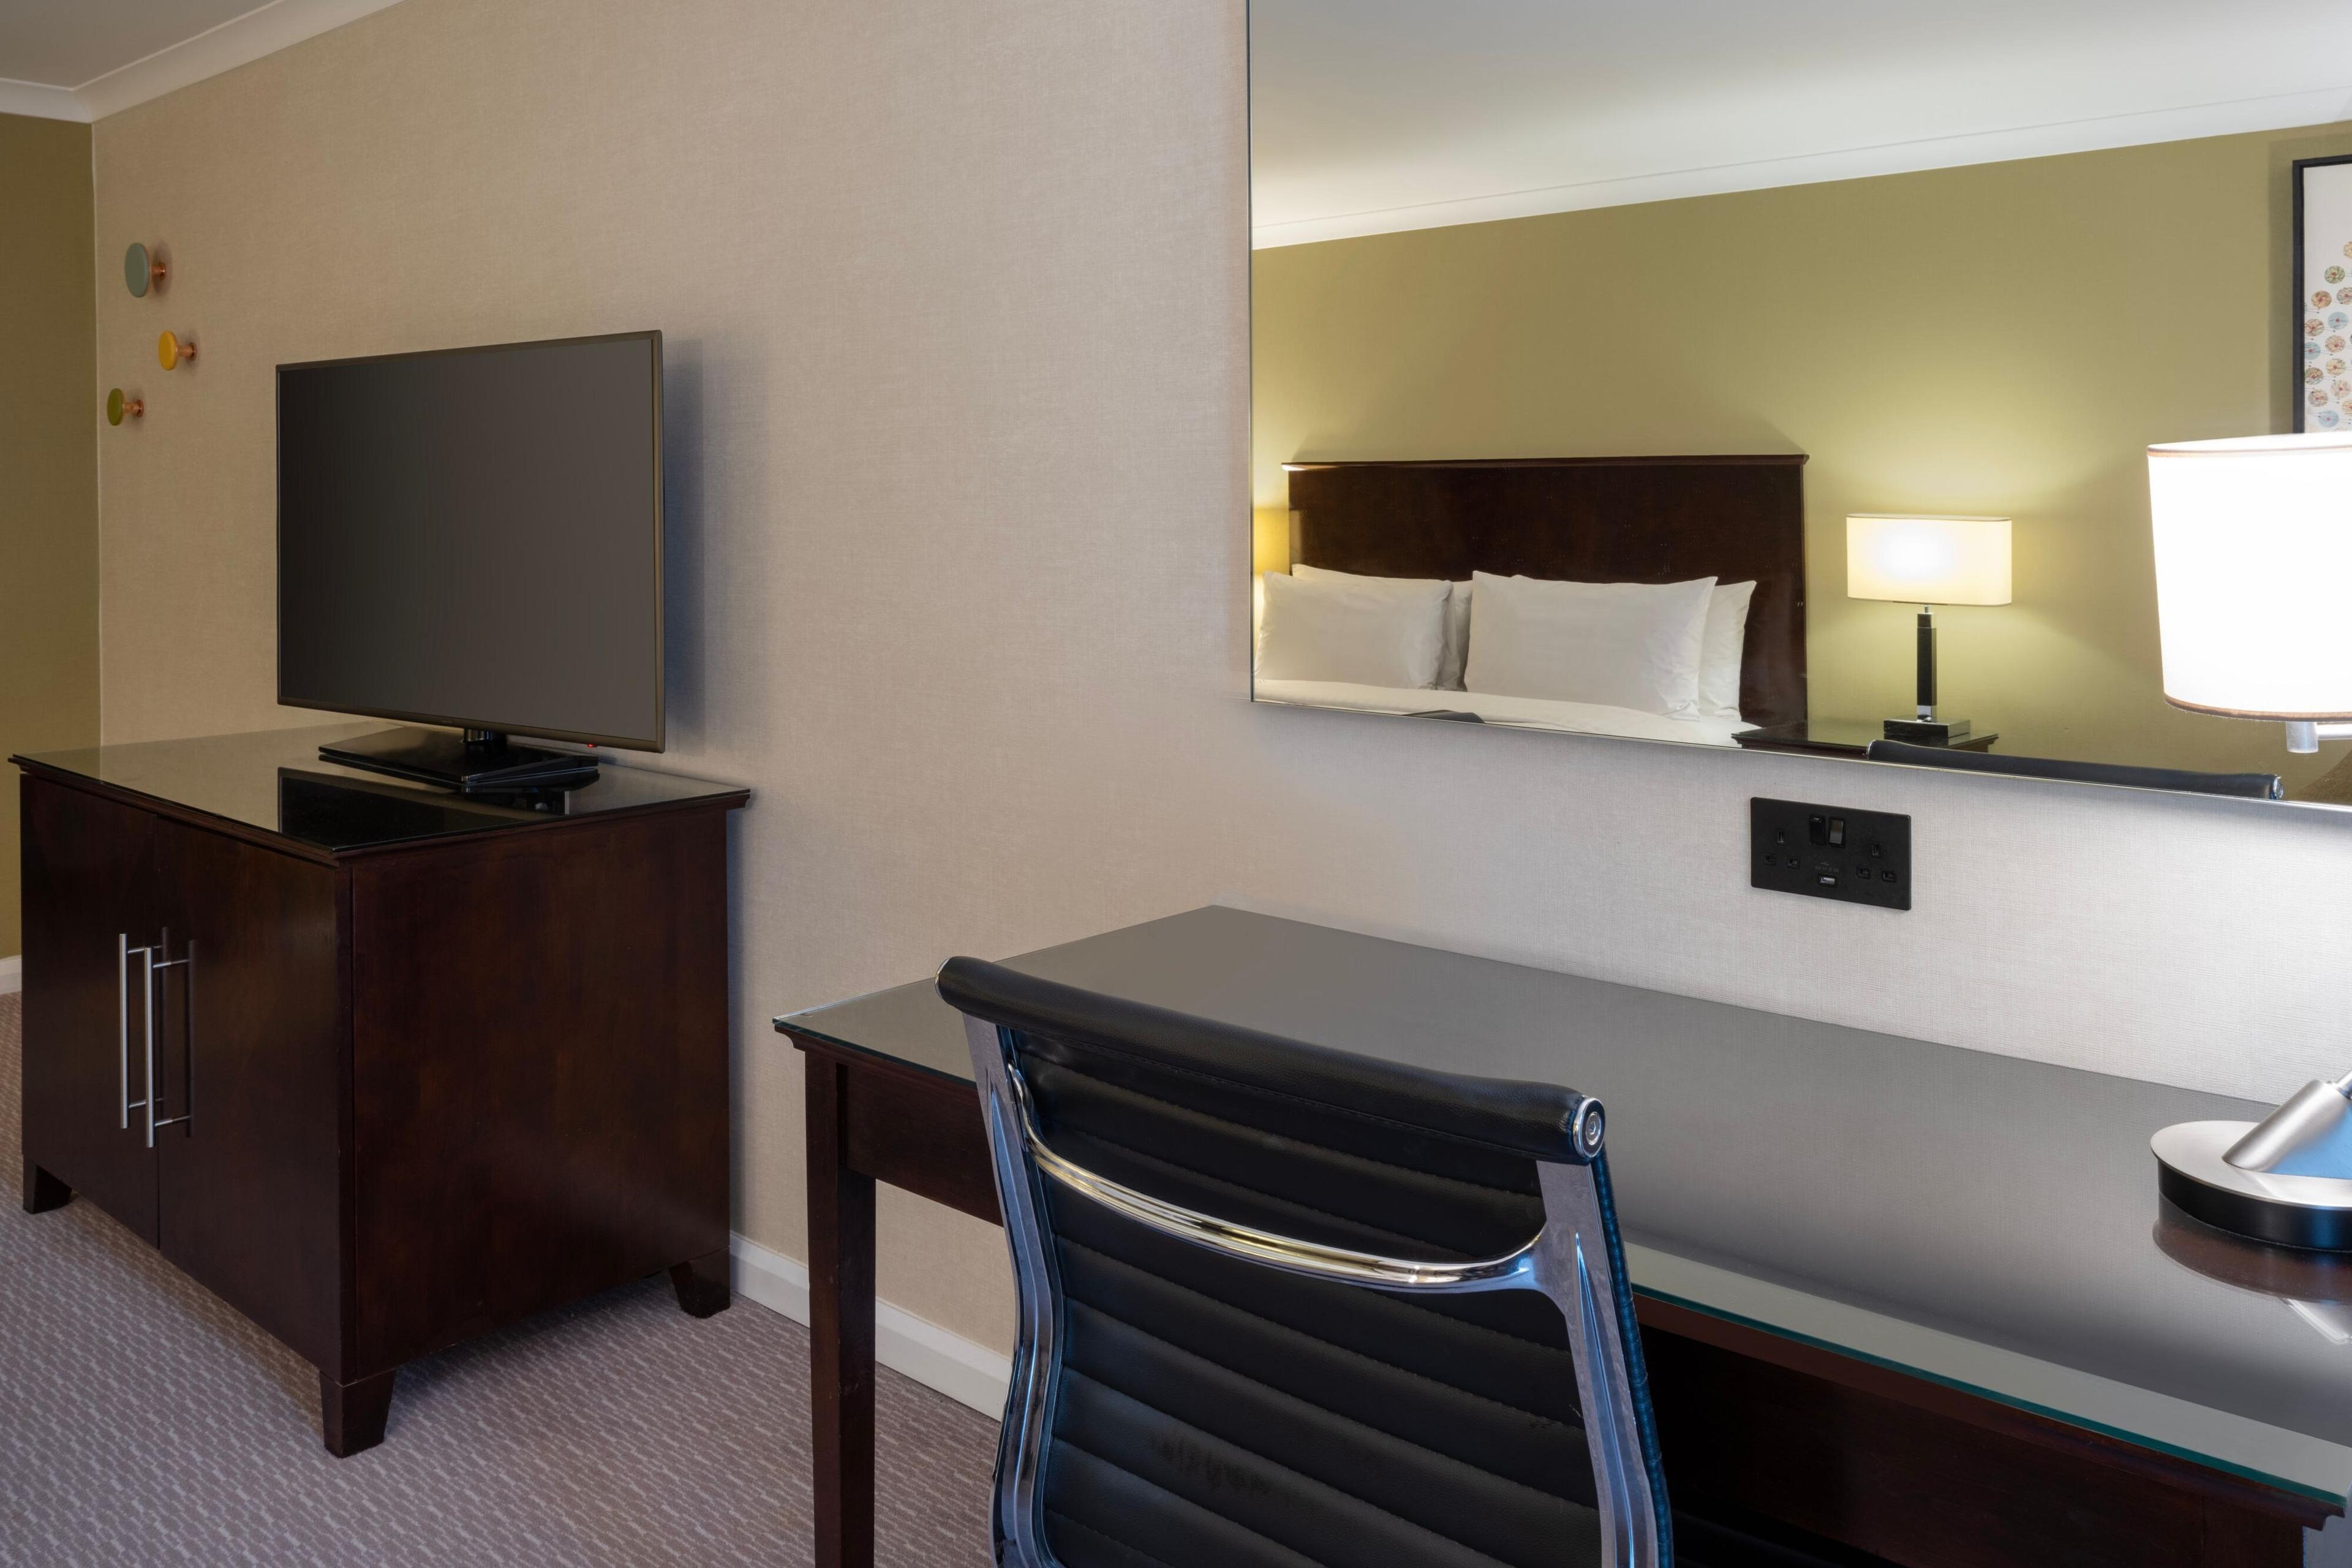 Make yourself at home in spacious accommodation with thoughtful details including pillowtop bedding, flat-screen TVs, high-speed Wi-Fi and bedside USB charging.